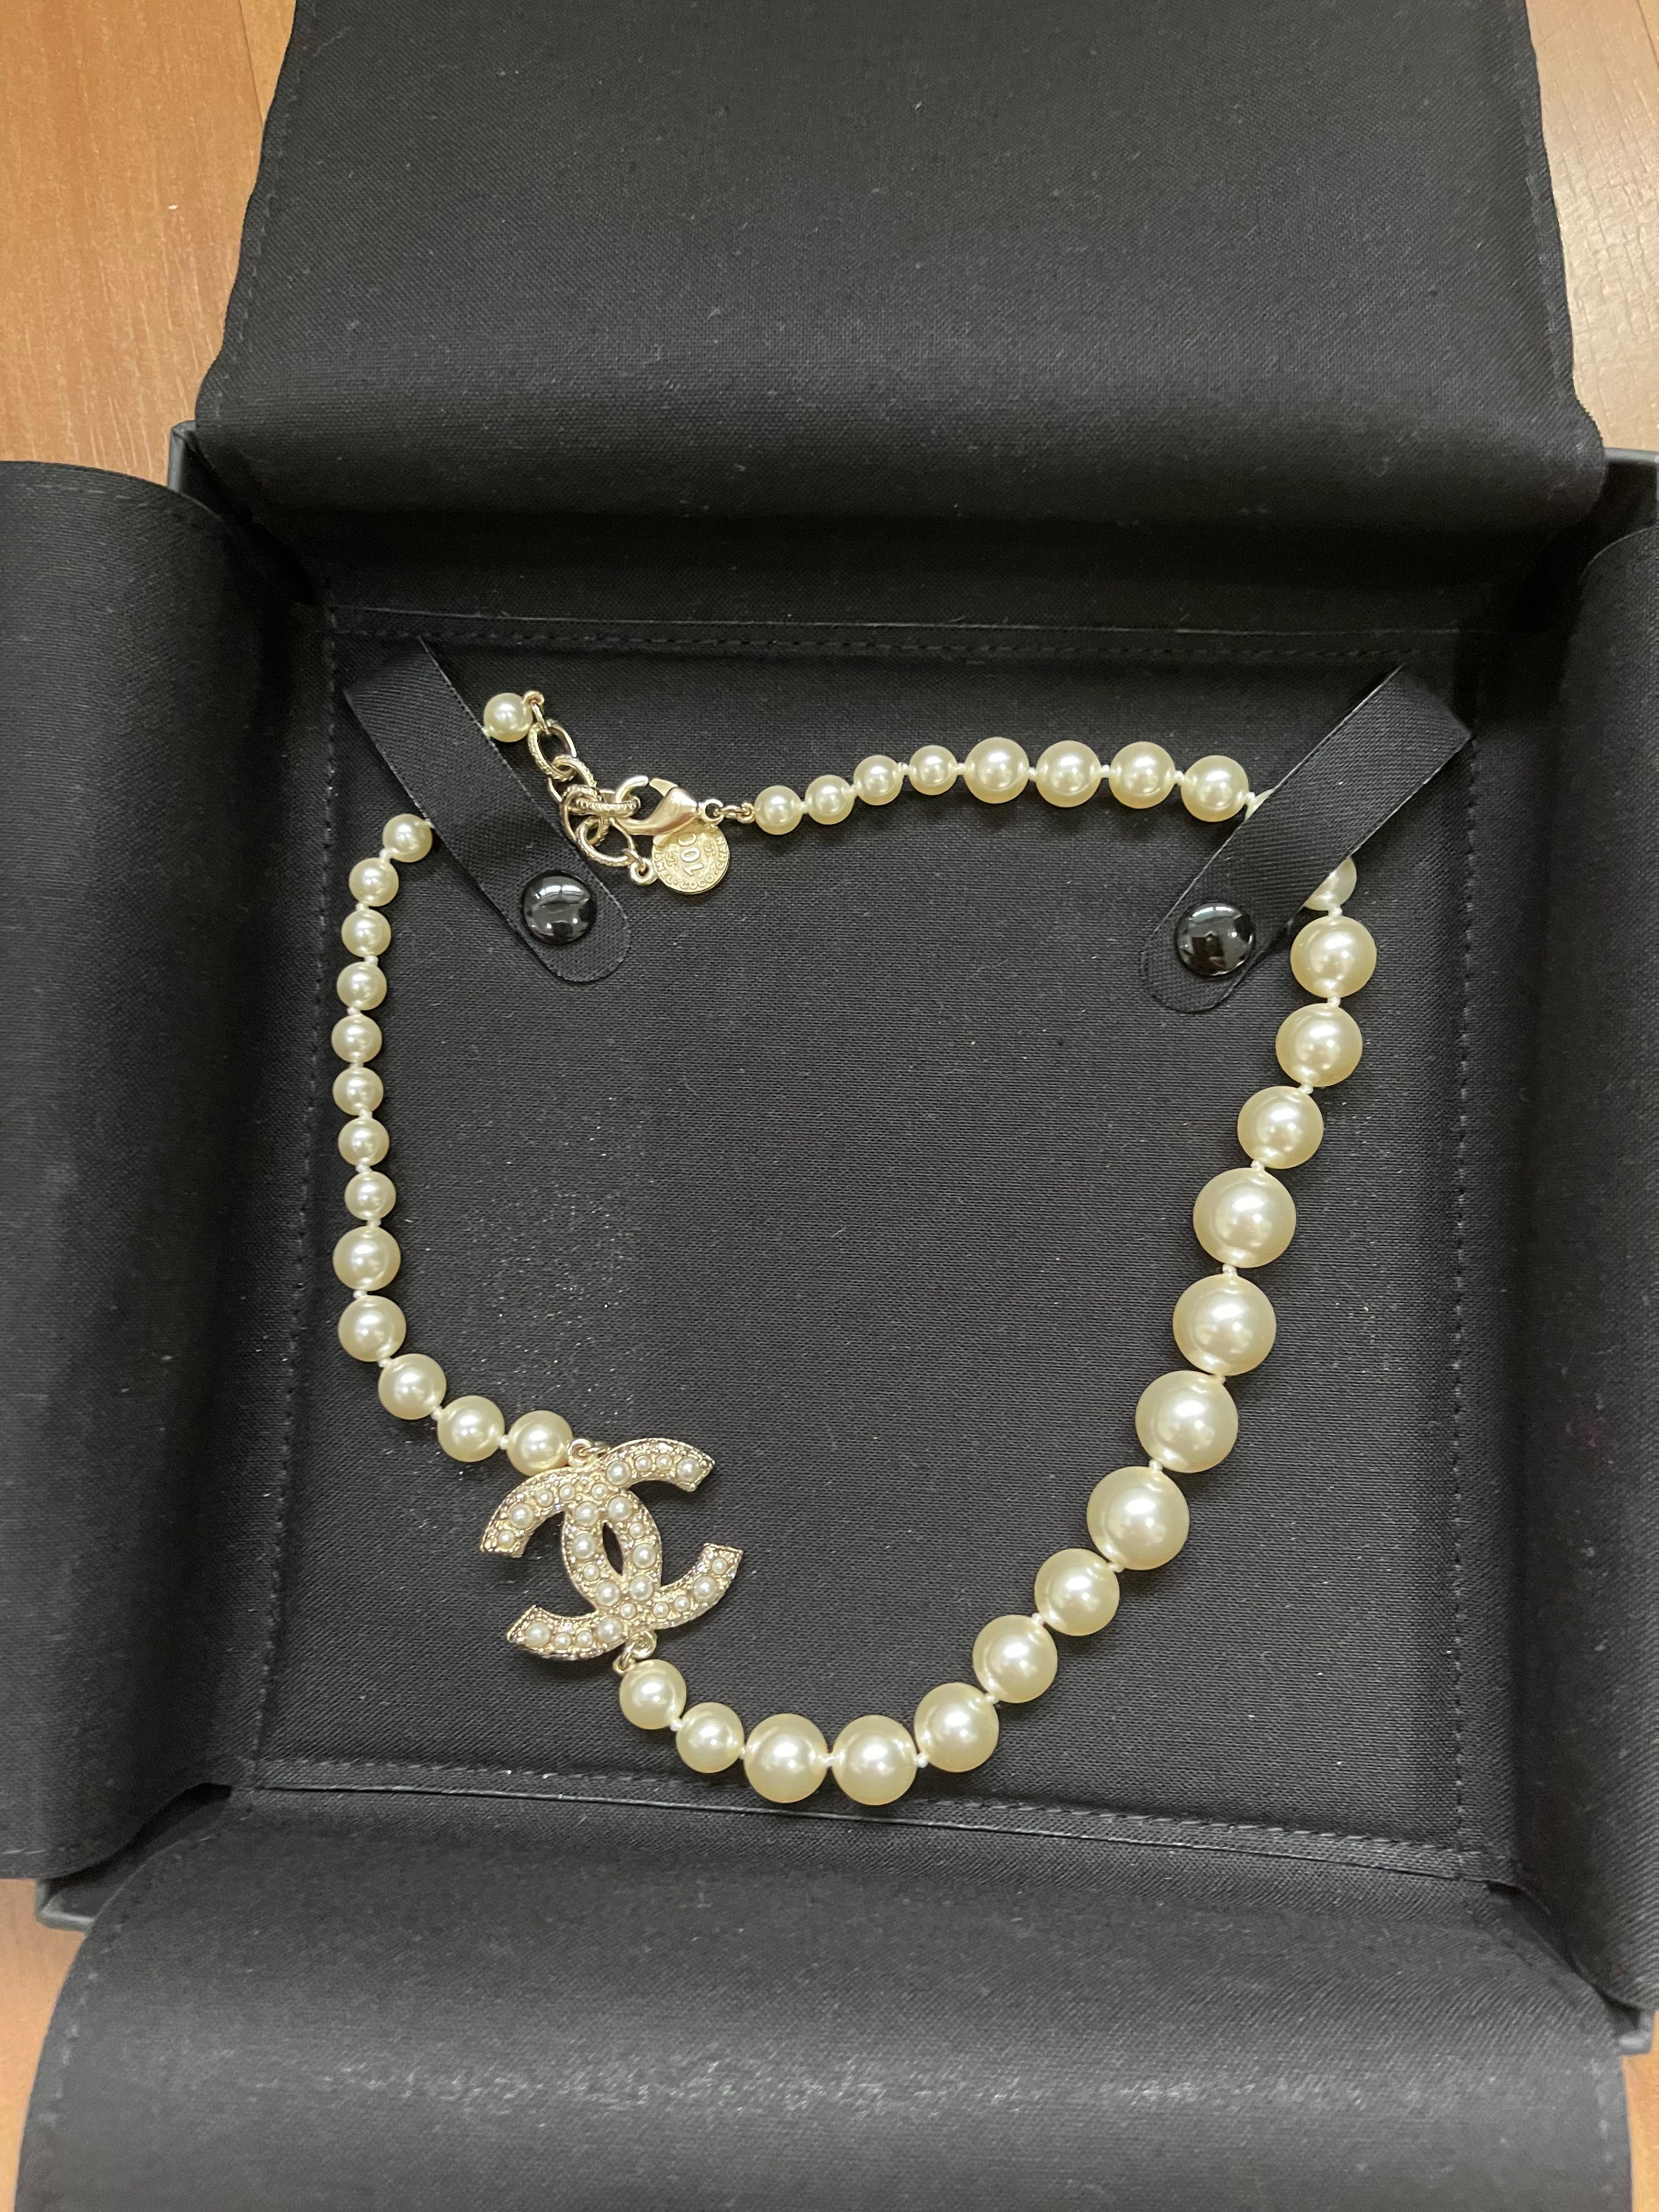 AUTHENTIC CHANEL Pearl White Silver 5 Crystal C Station Cc Logos 42  Necklace  eBay  Chanel pearls Chanel pearl necklace Dainty jewelry  necklace